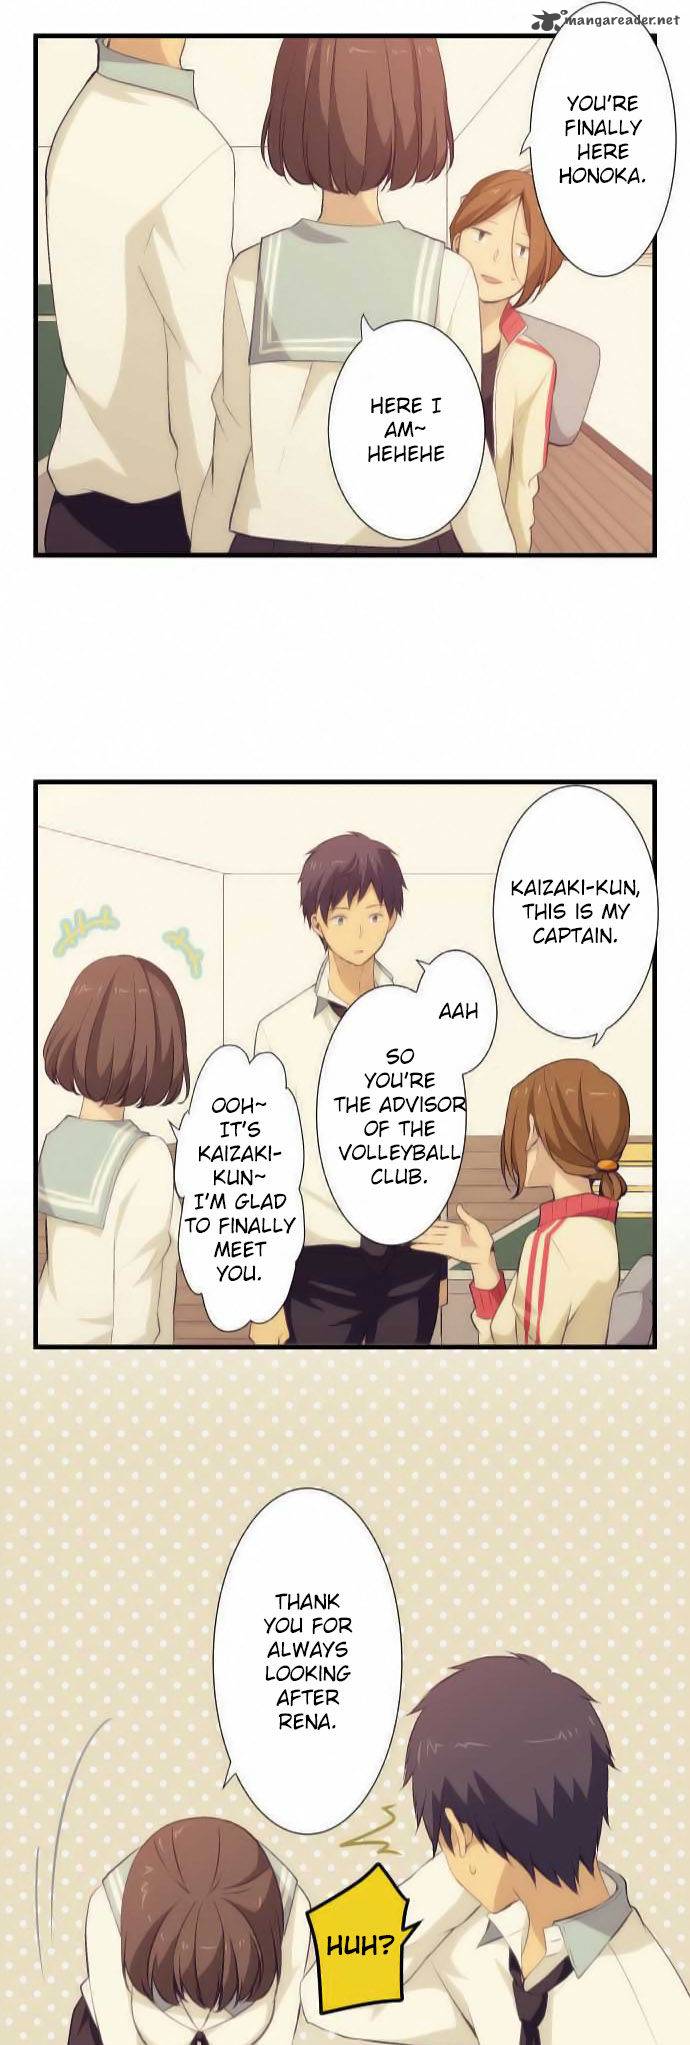 Relife 57 22